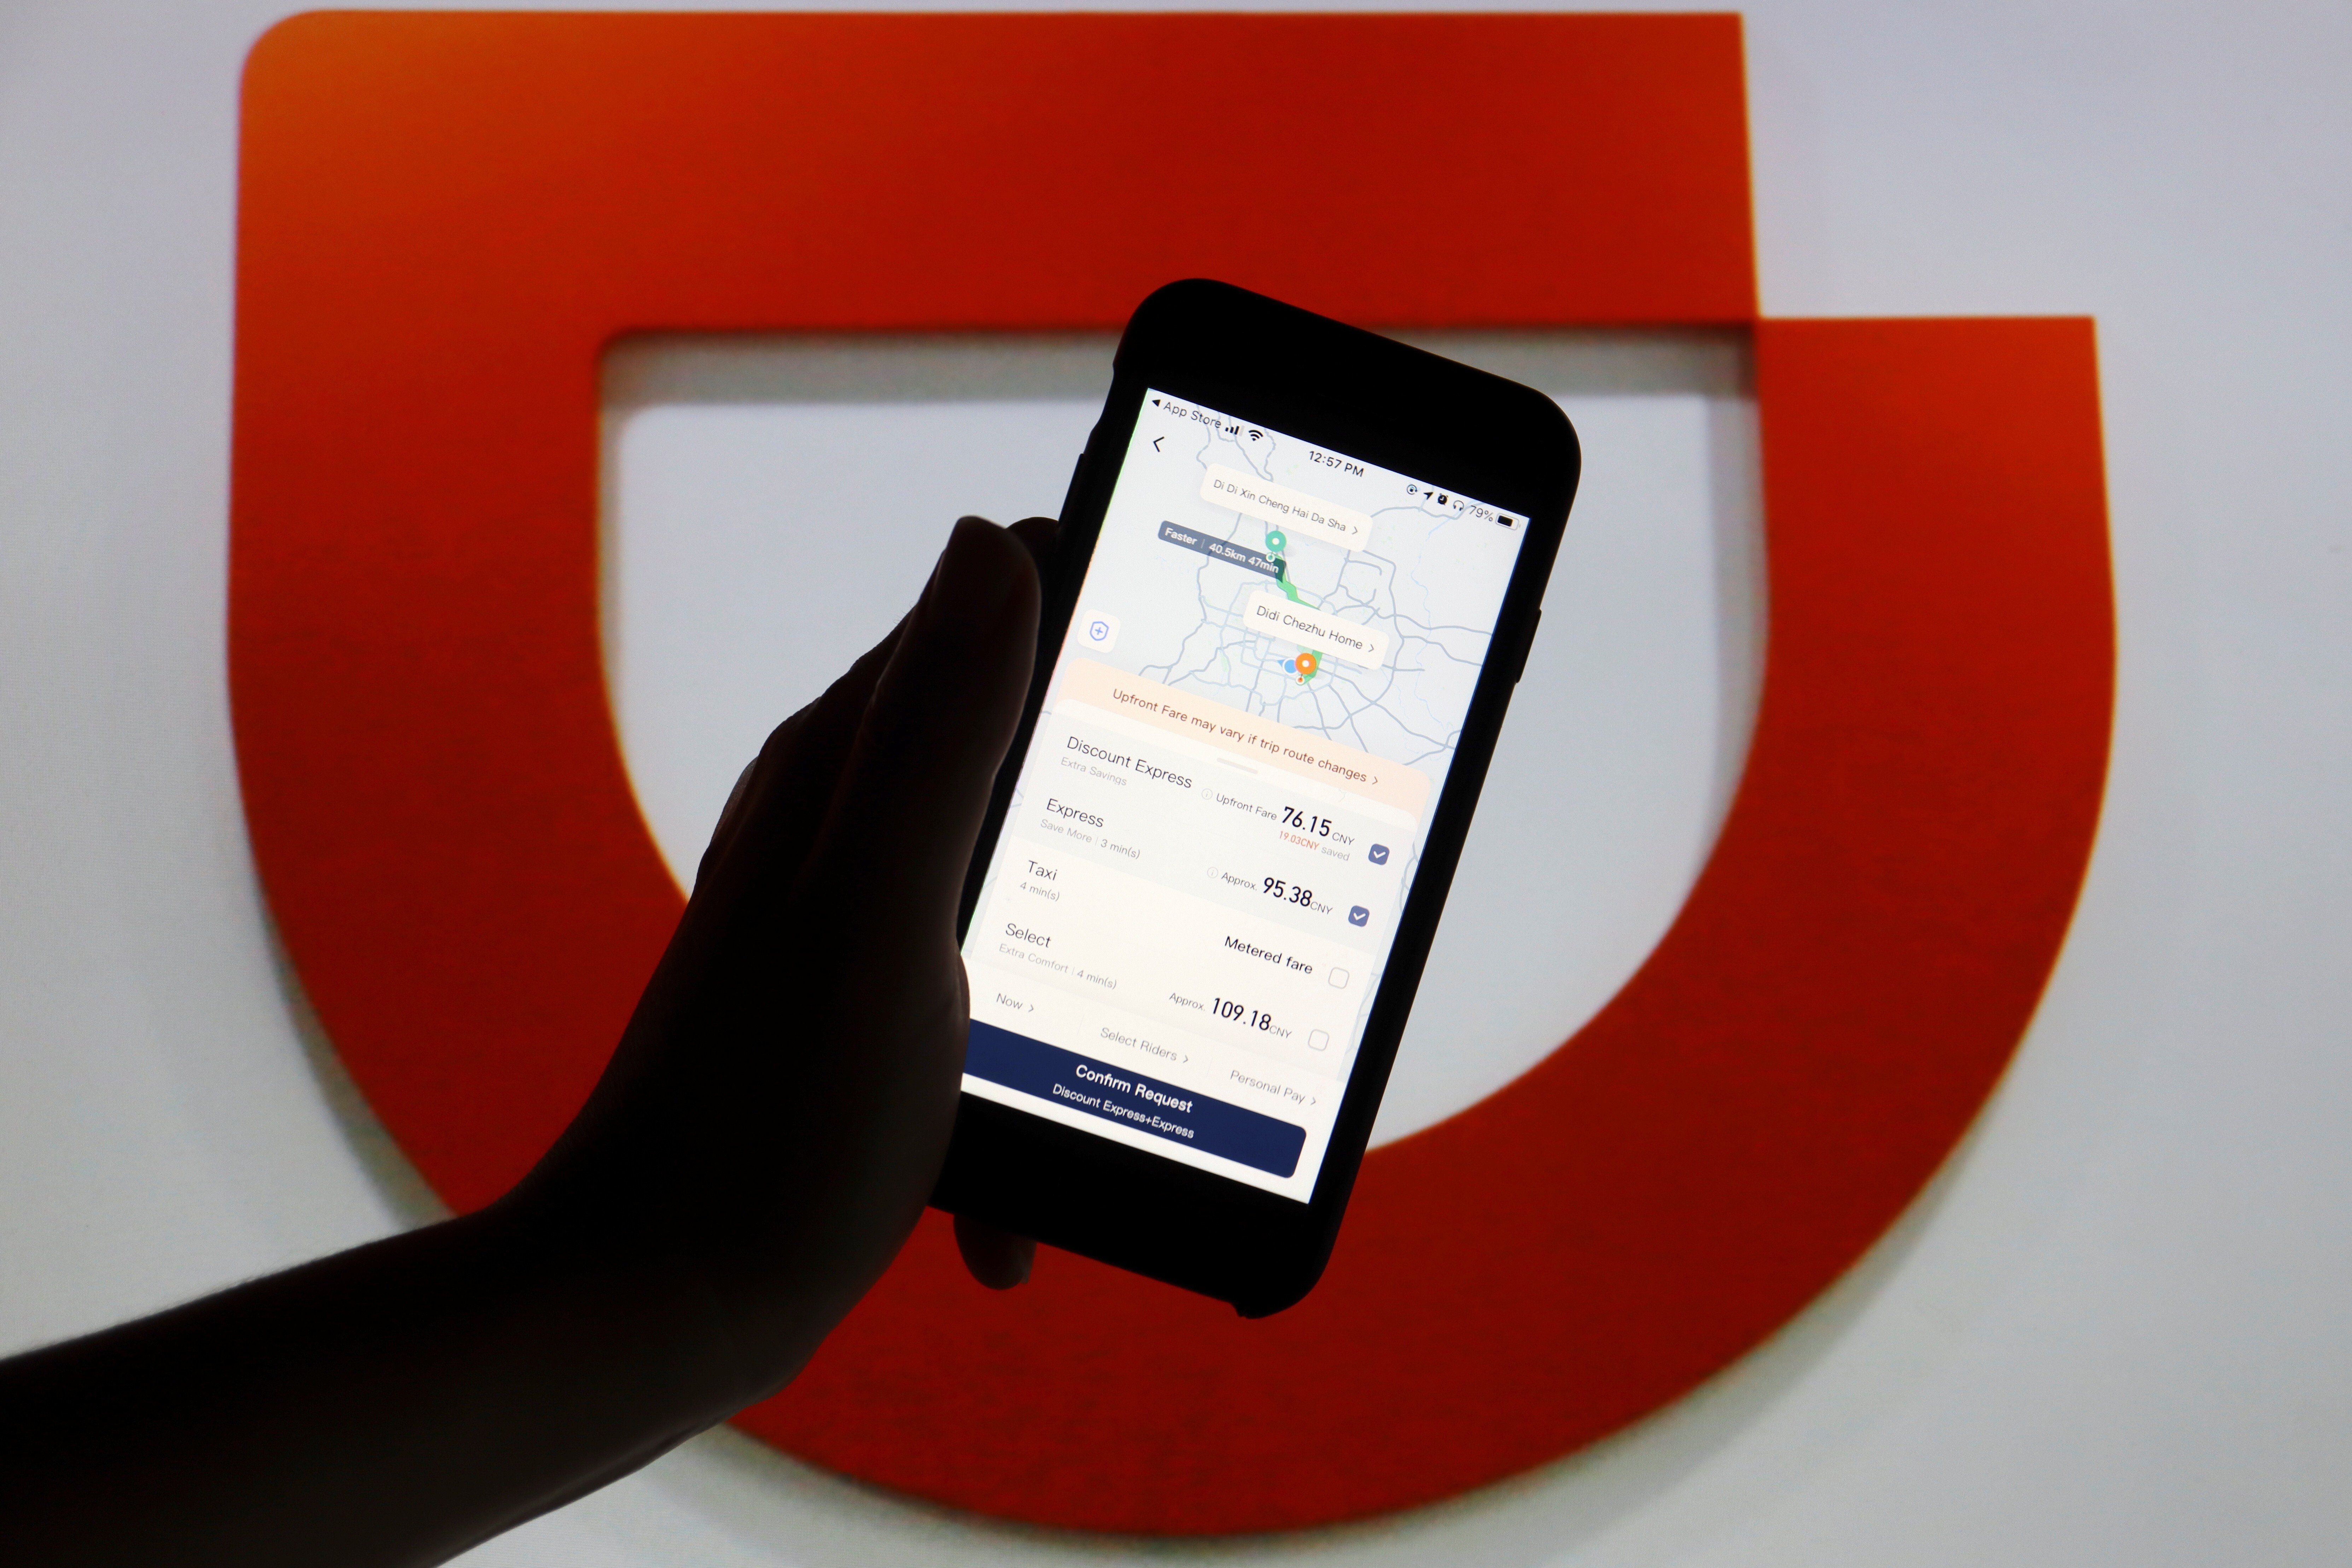 Chinese ride-hailing giant Didi Chuxing’s average daily active users decreased to 10.9 million in August from 15.6 million in June, while some of its smaller rivals either increased their user numbers or saw them fall by a smaller proportion. Photo: Reuters